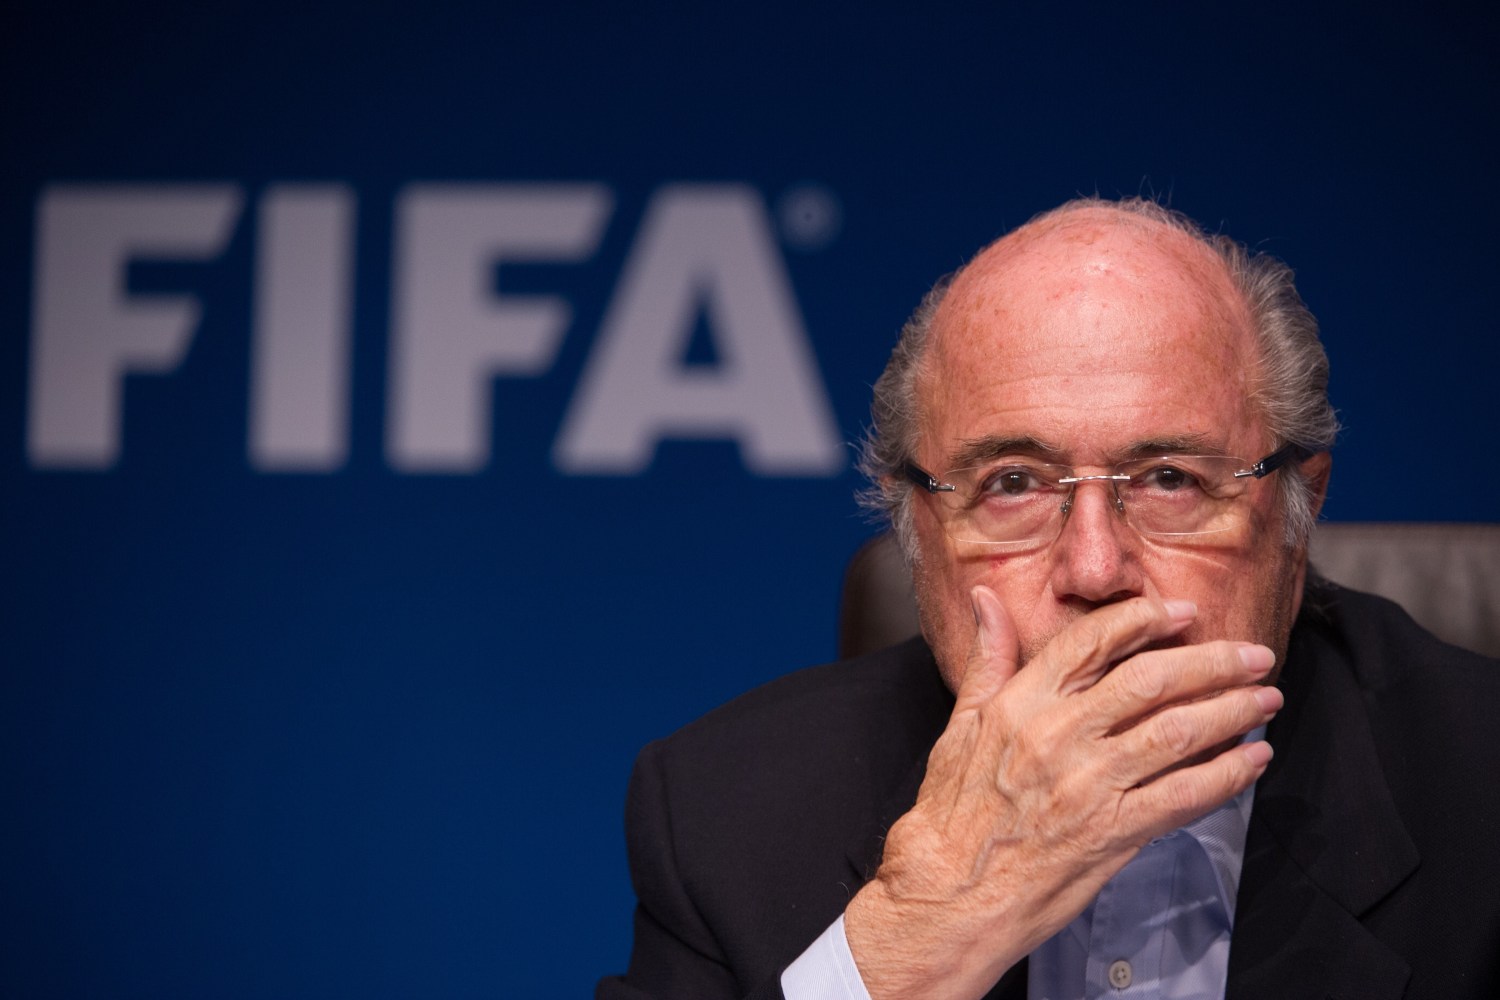 Blatter Ex-FIFA Boss Gets New Six-Year Ban From Football